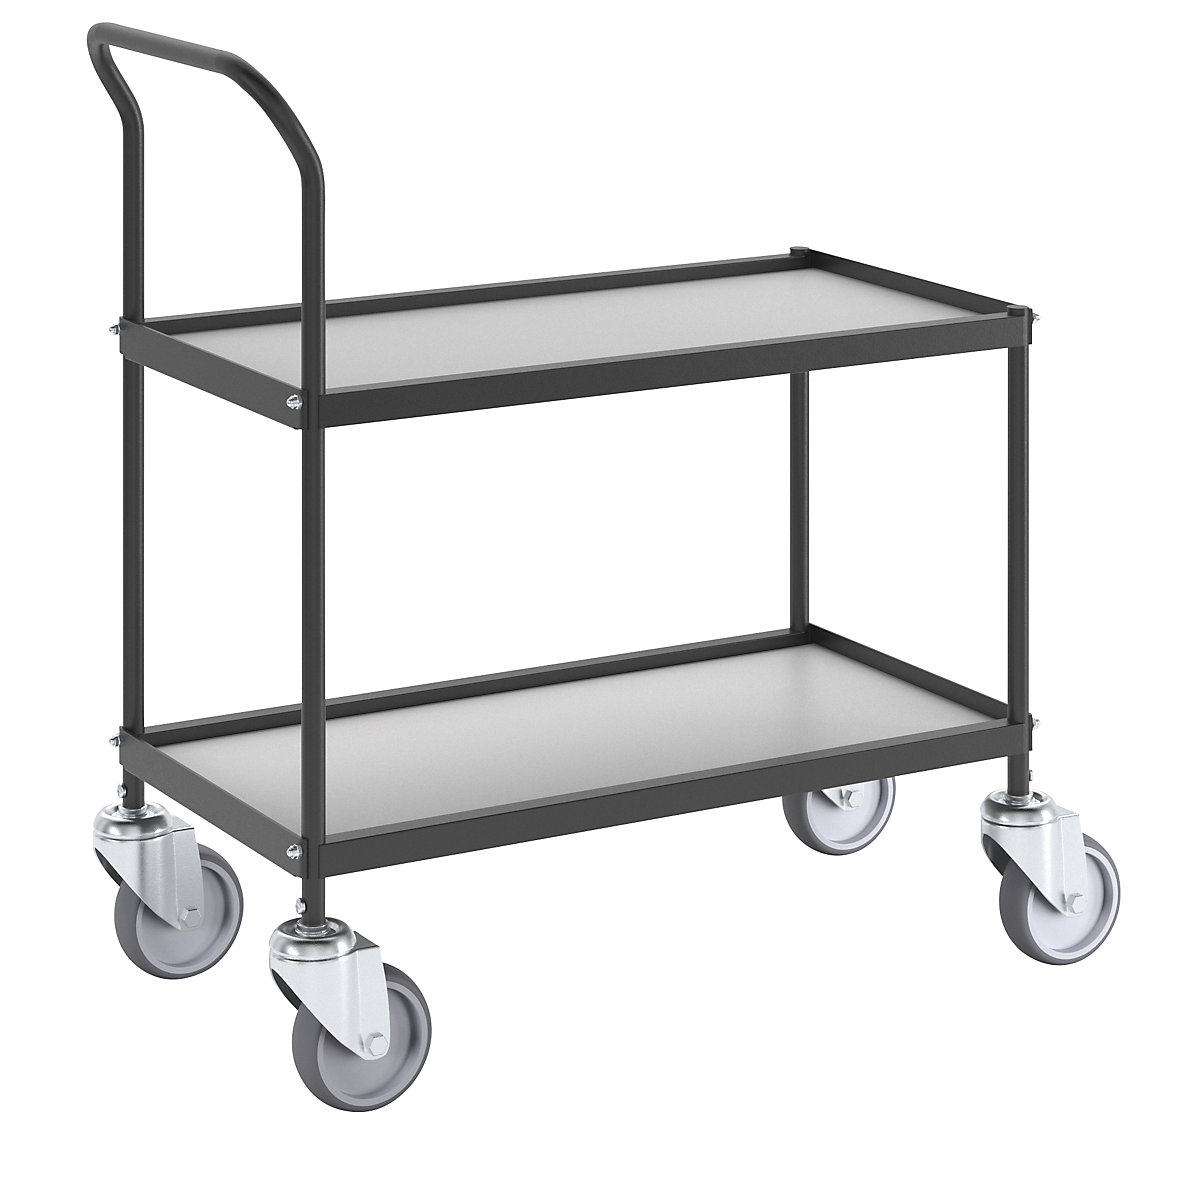 Serving and clearing trolley, 2 shelves, LxWxH 720 x 380 x 855 mm-5